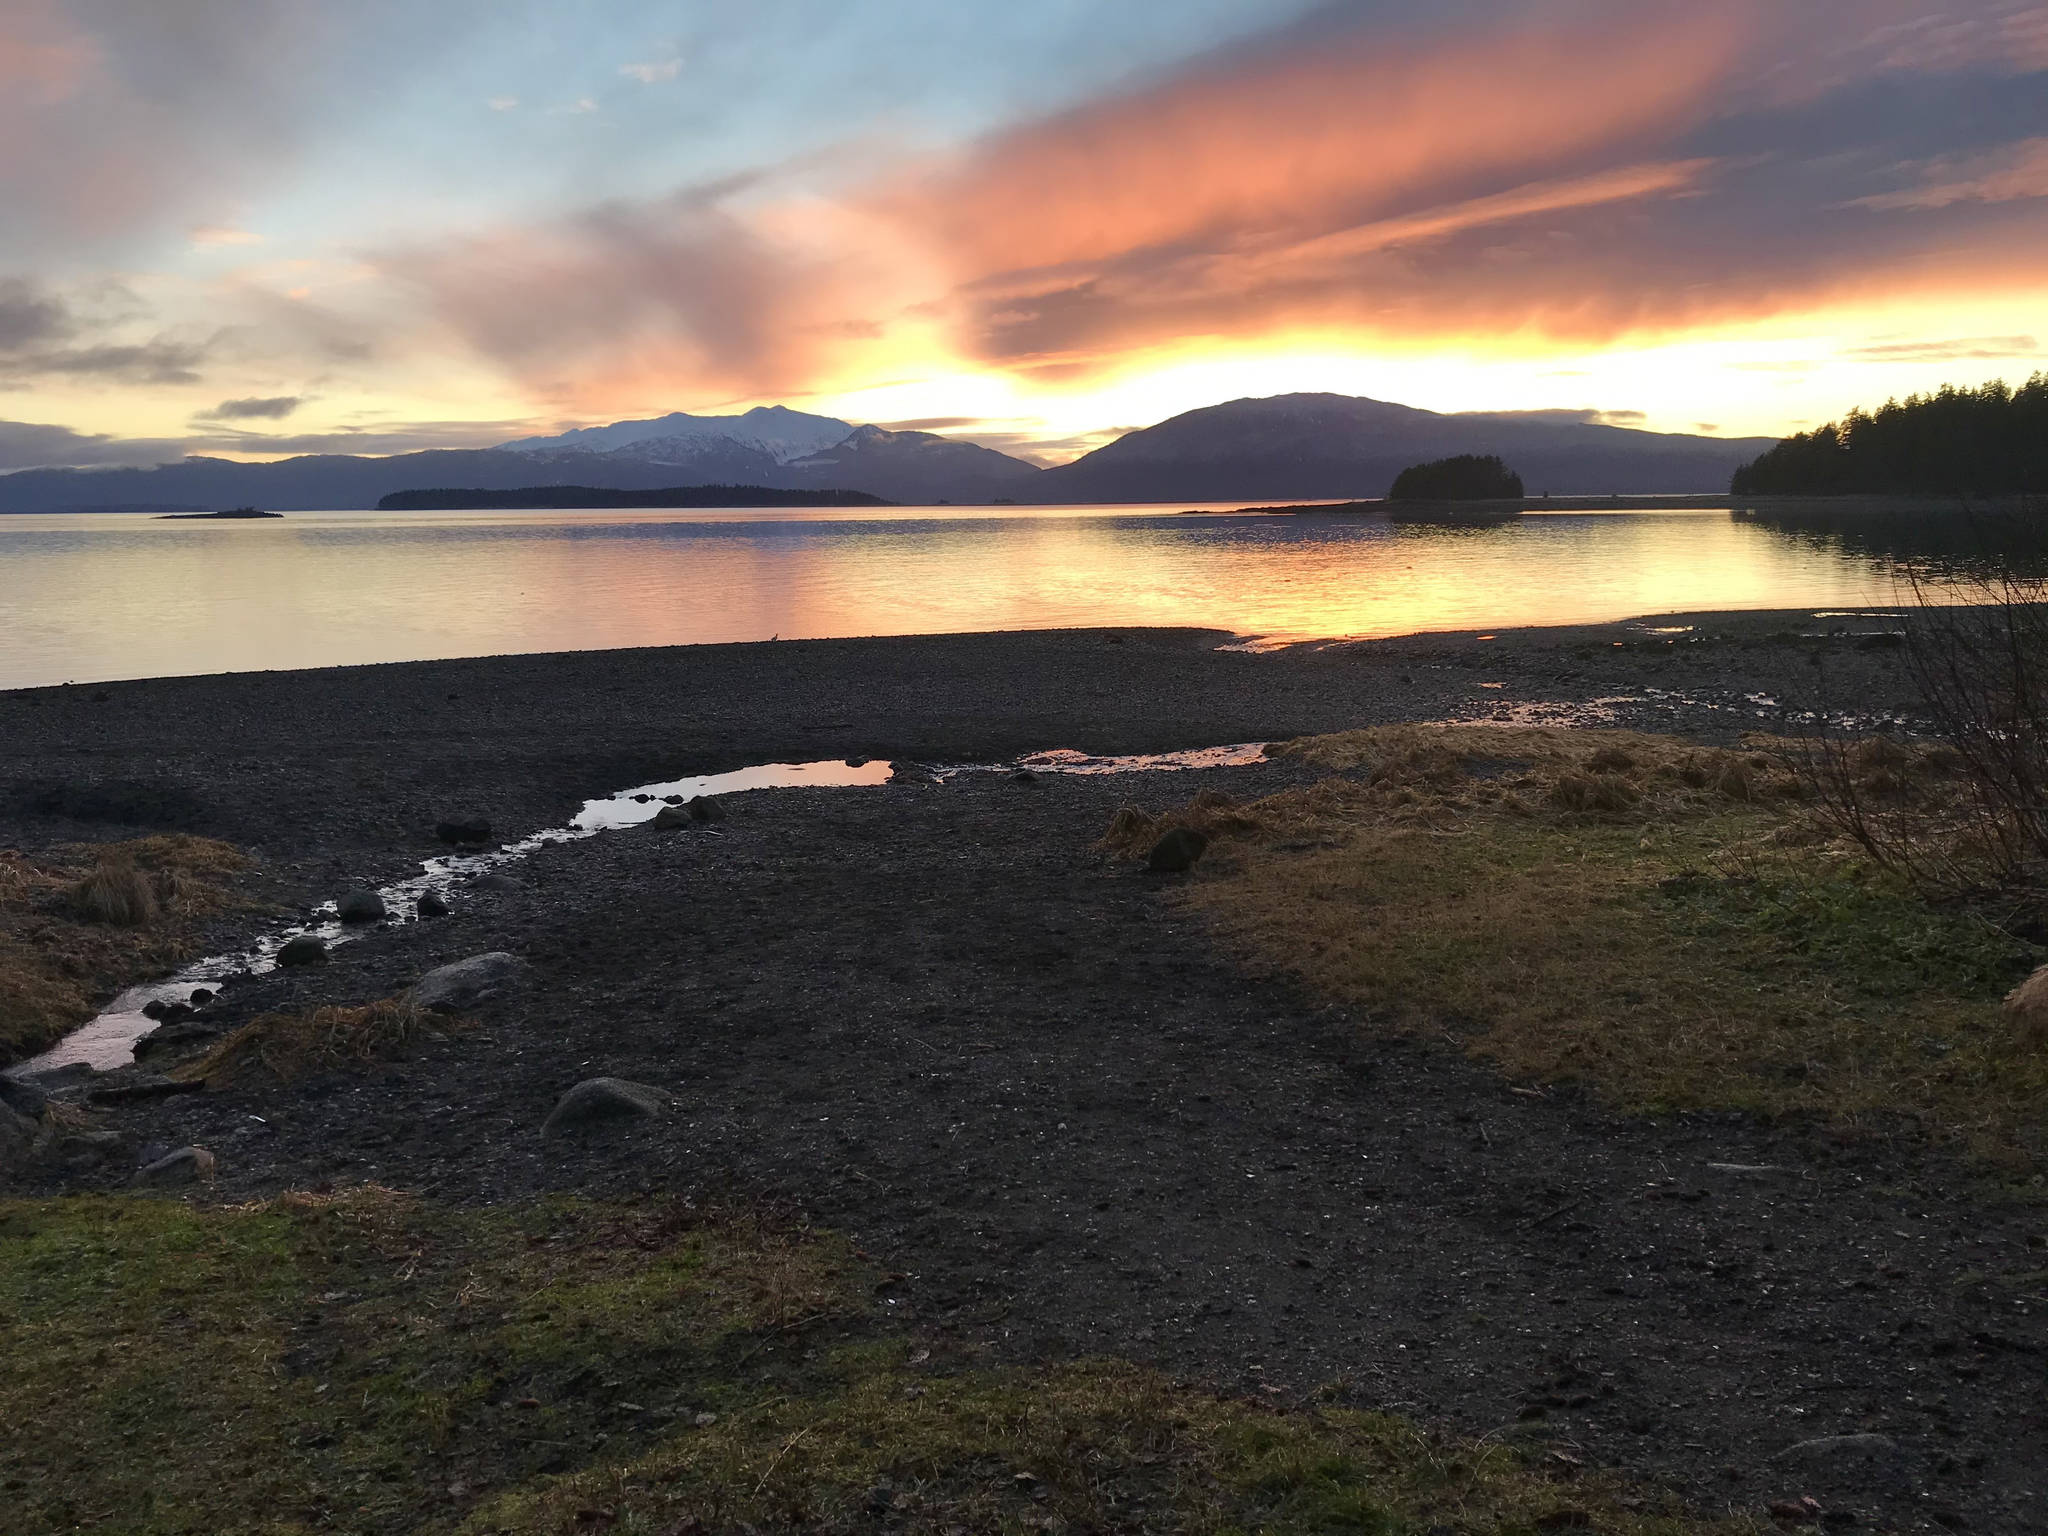 This photo was taken near Auke Recreation Area near Blue Jay Shelter. Portland Island is in the foreground, looking out toward the Chilkat Range, Dec. 26, 2020. (Courtesy Photo / Dick Fagnant)